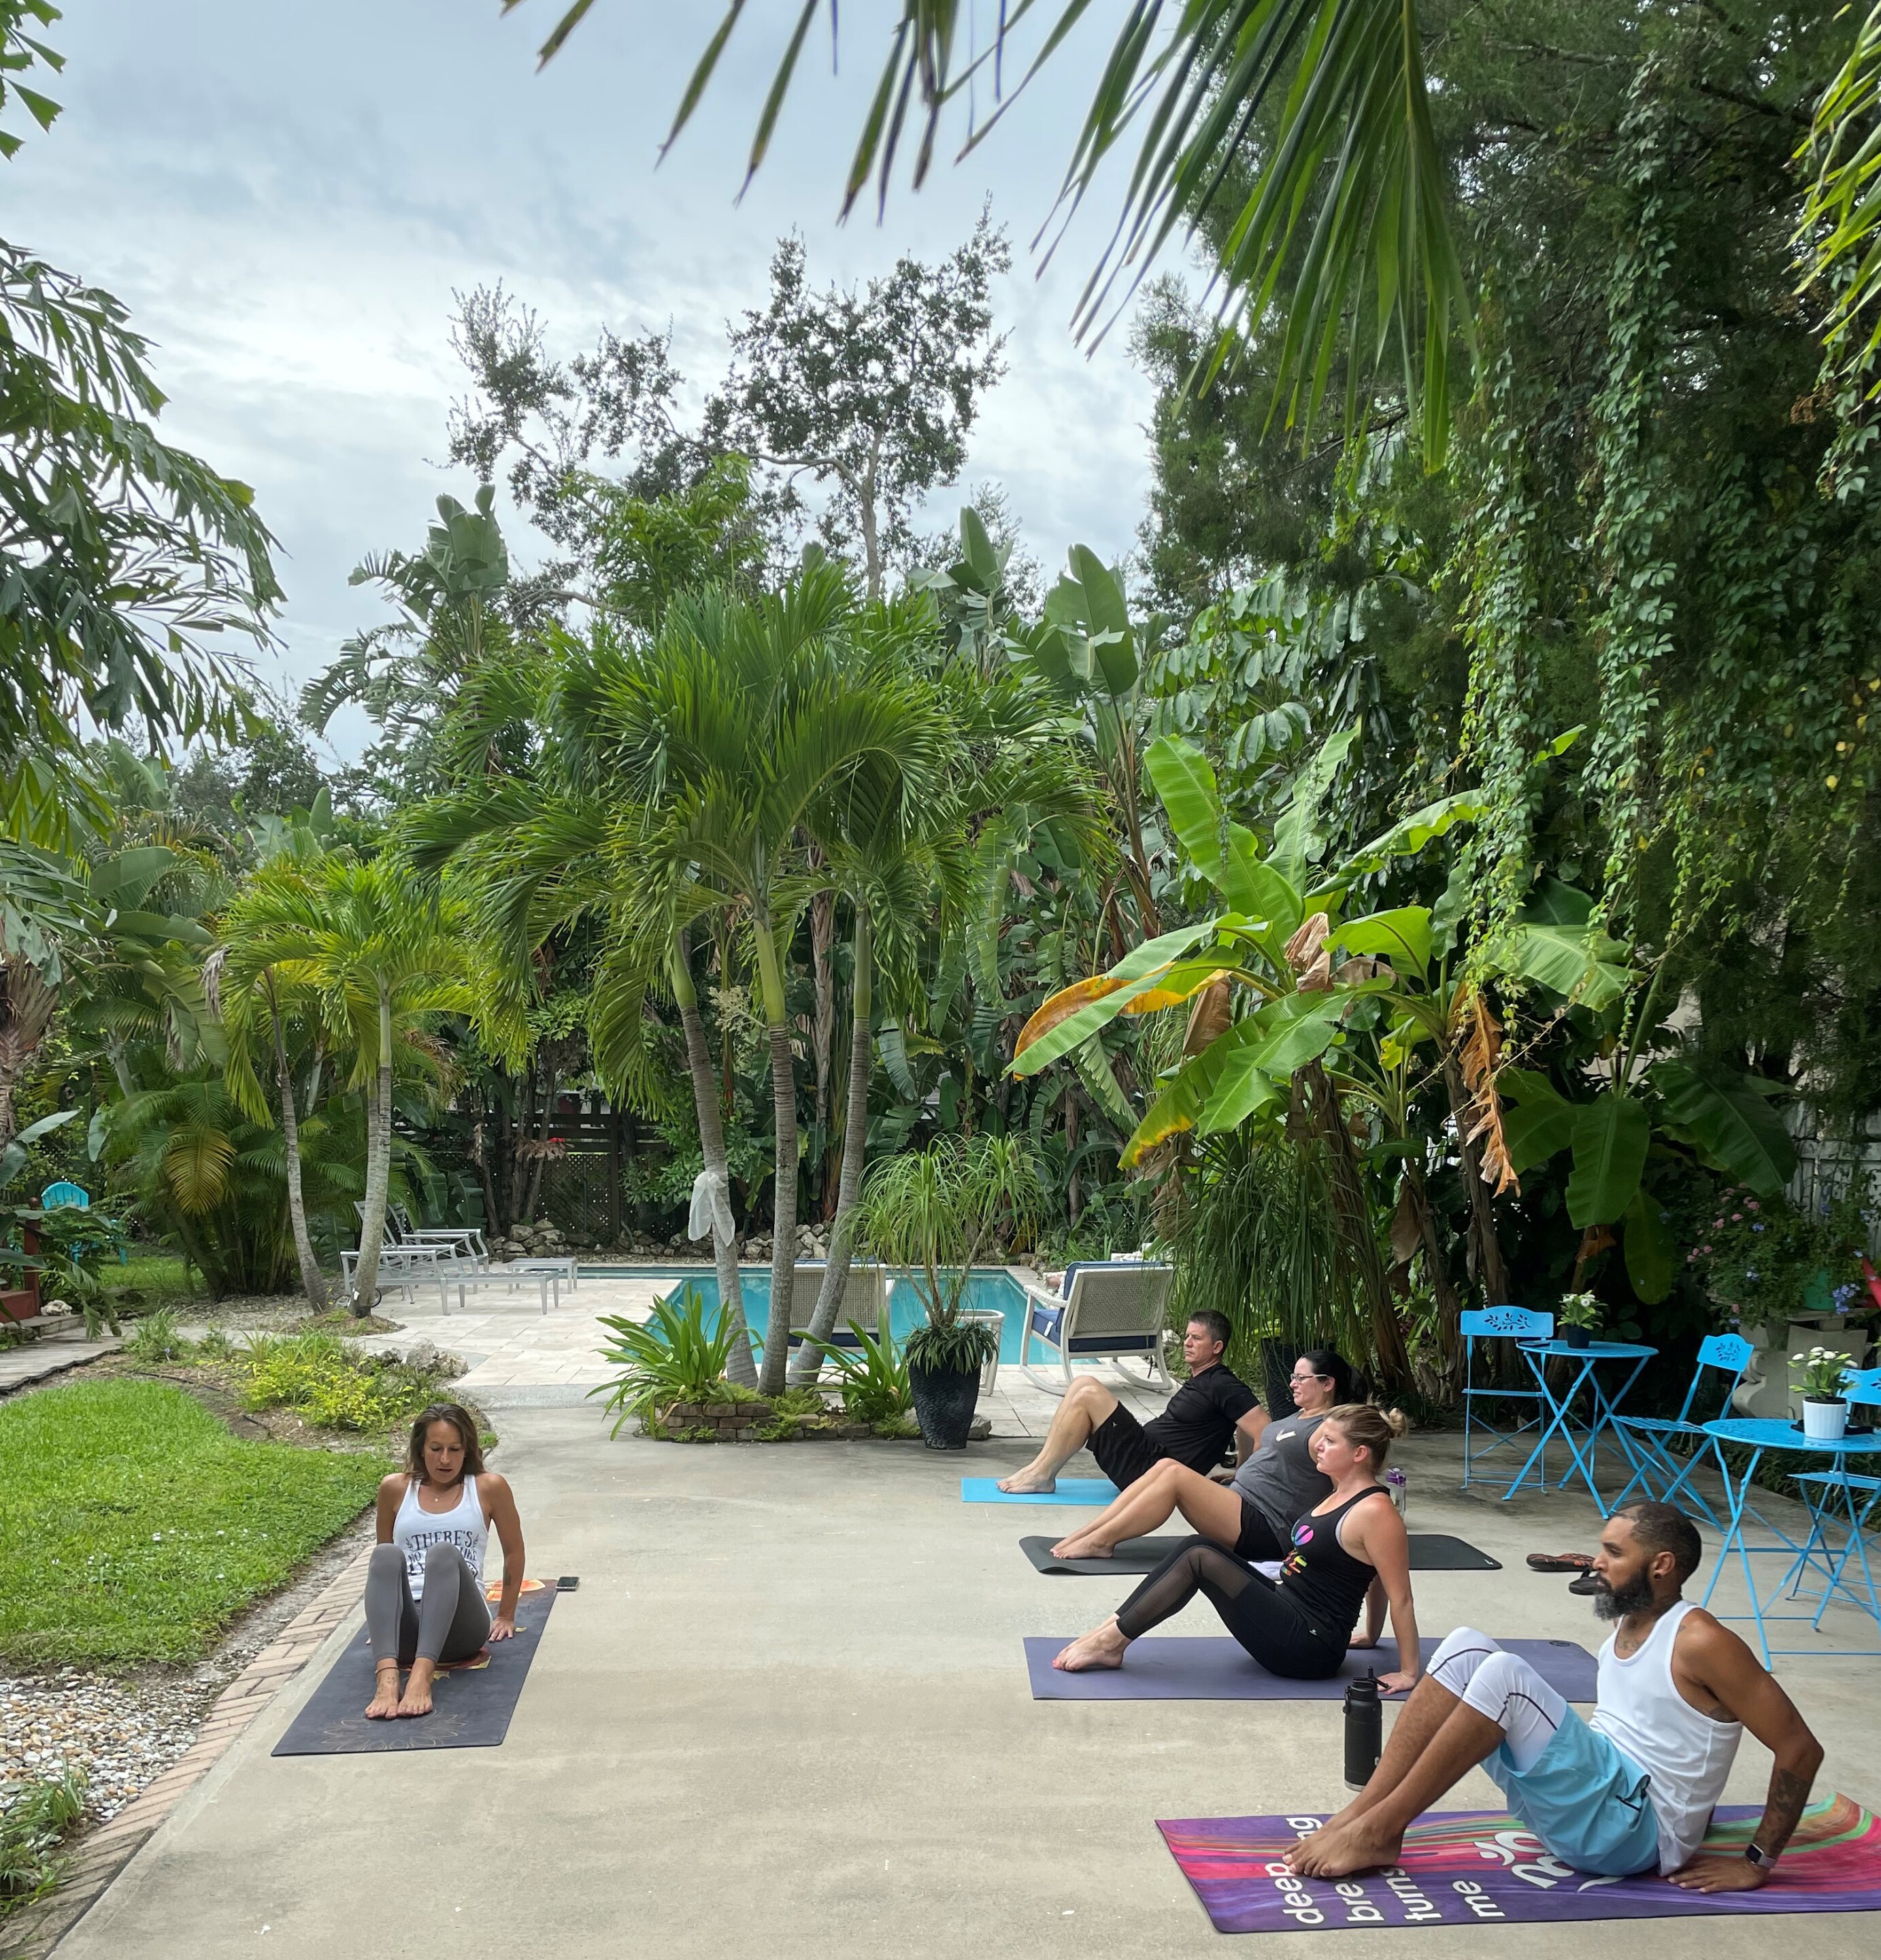 Poolside yoga and meditation twice daily to ensure you remain relax.